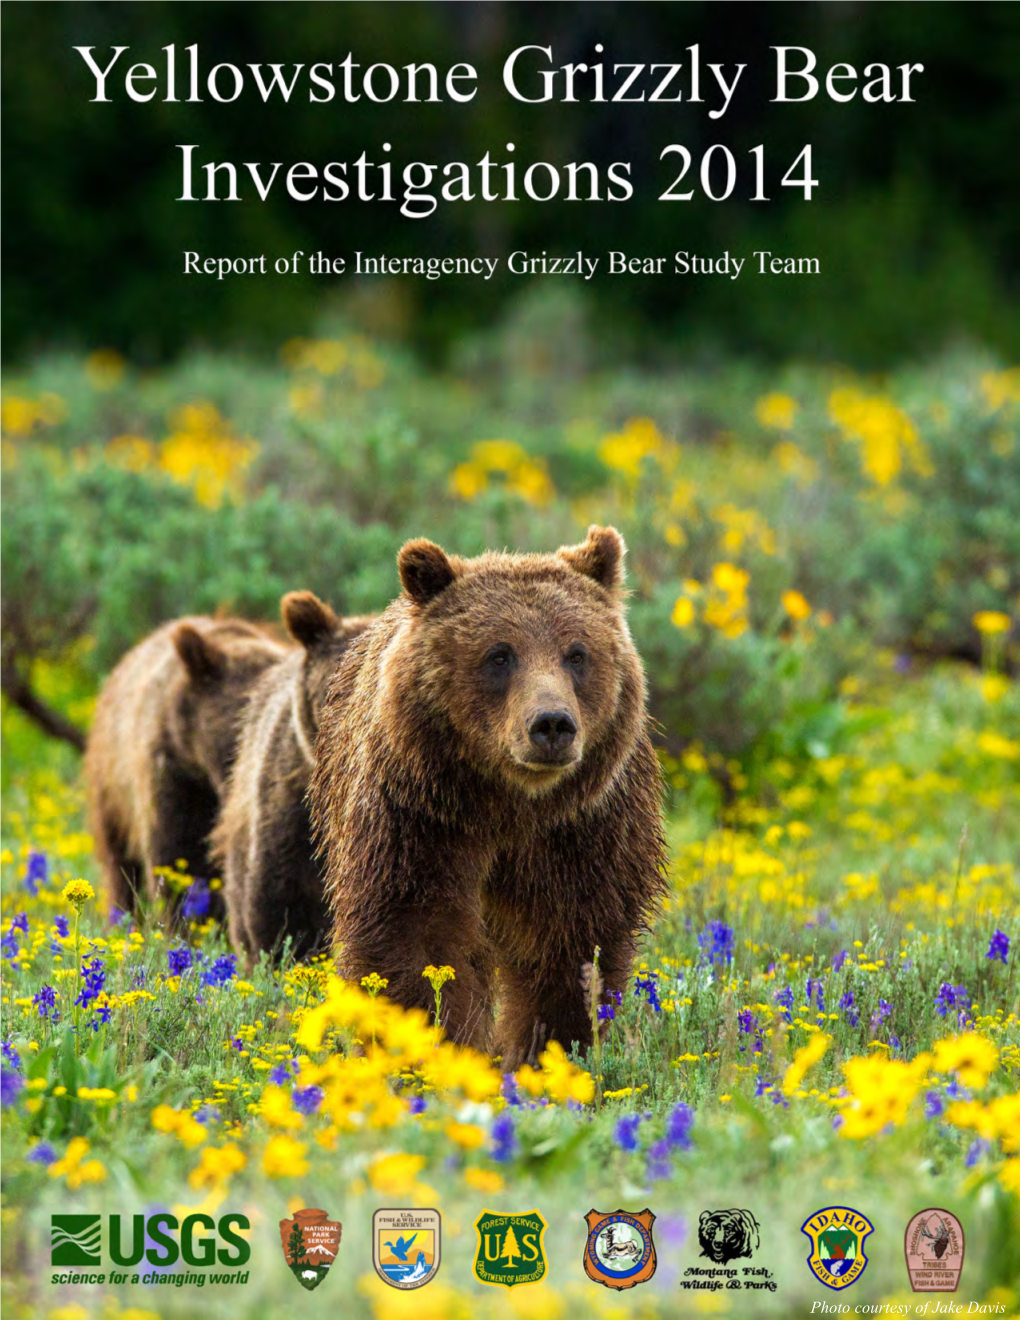 Yellowstone Grizzly Bear Investigation 2014